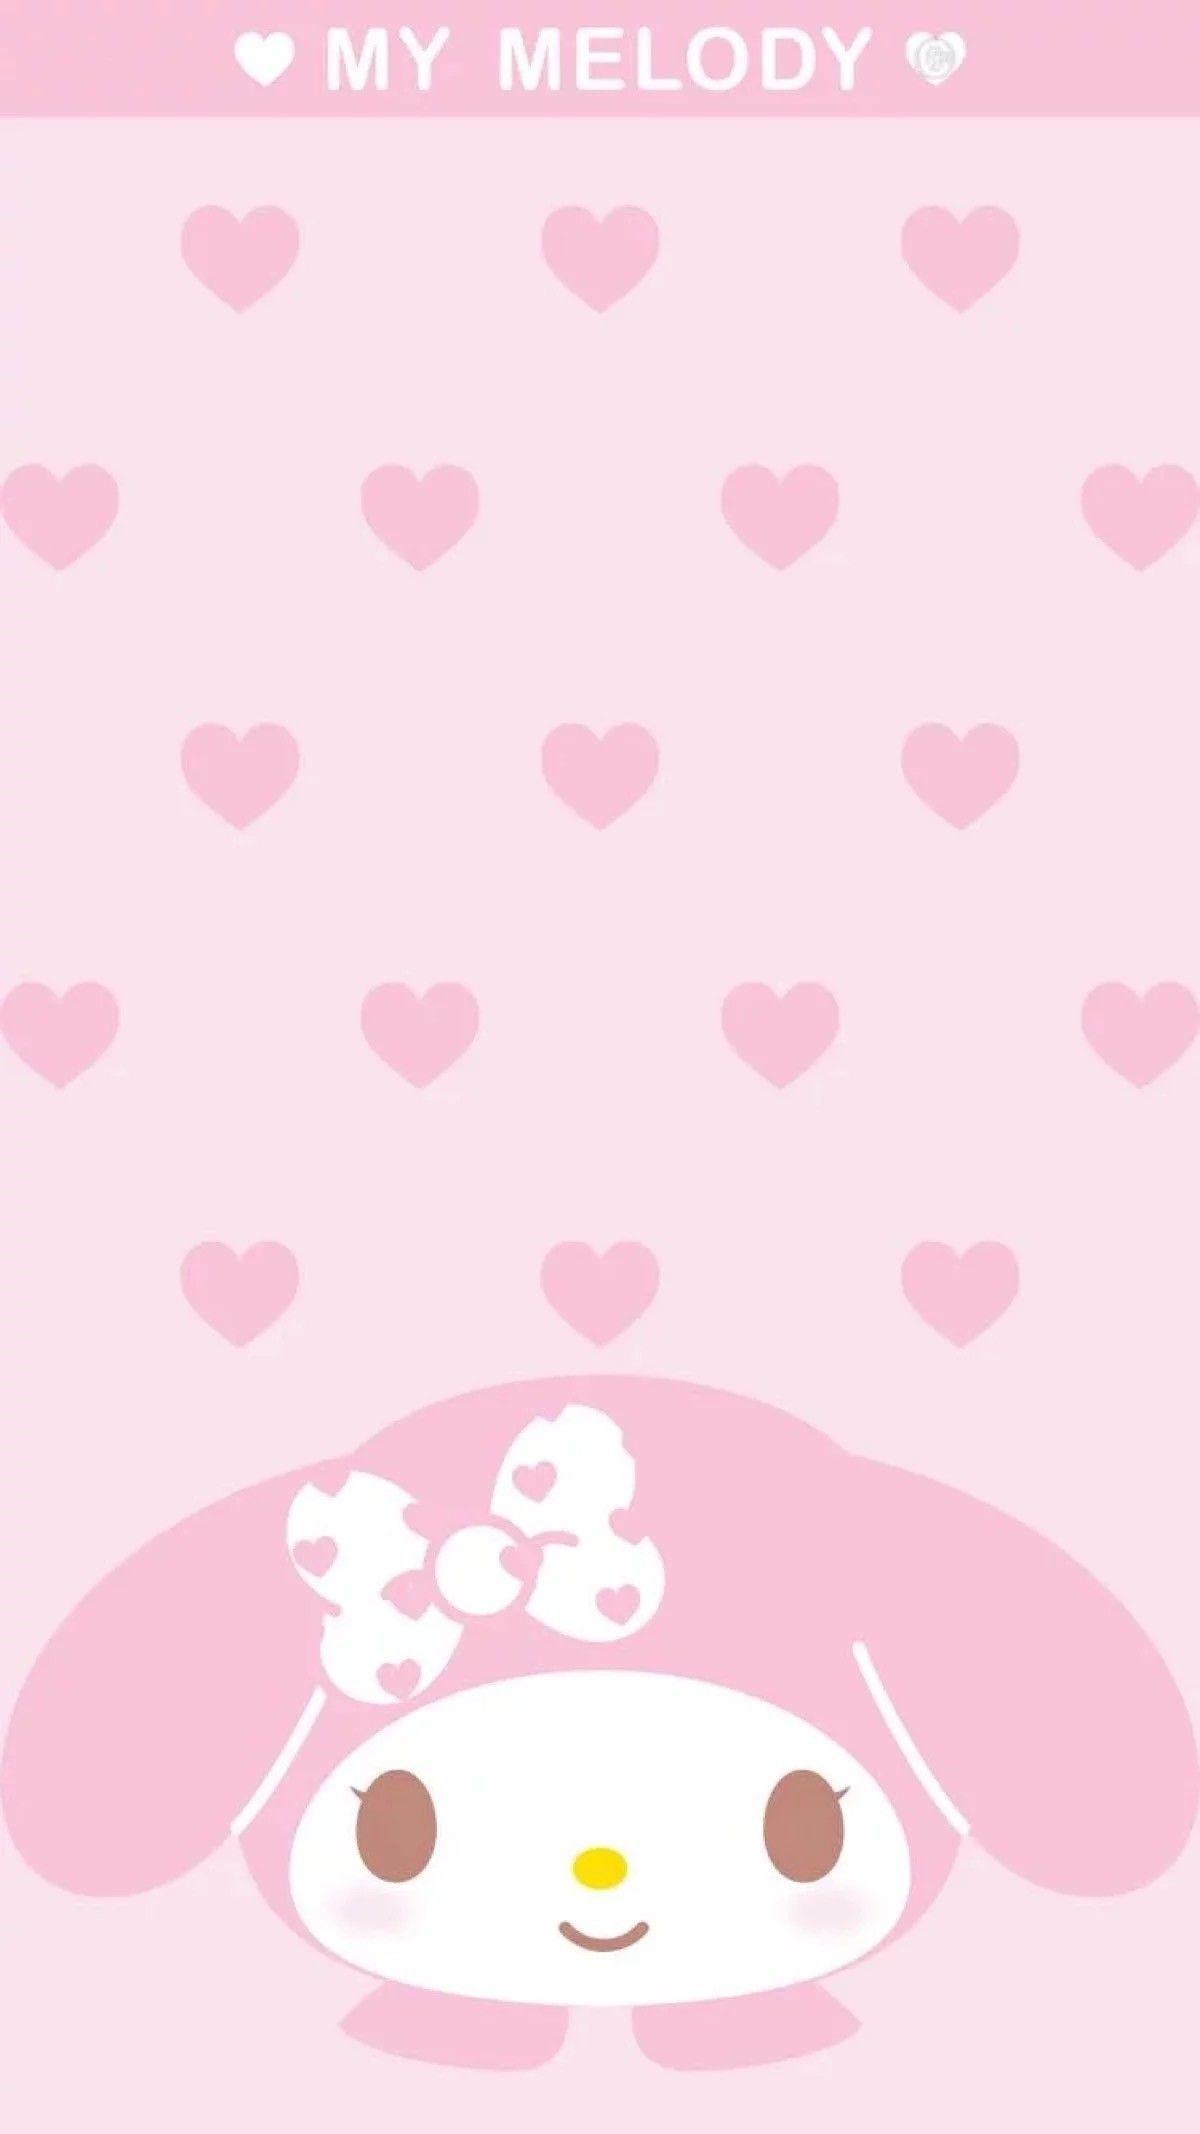 My Melody Iphone Wallpapers Top Free My Melody Iphone Backgrounds Wallpaperaccess